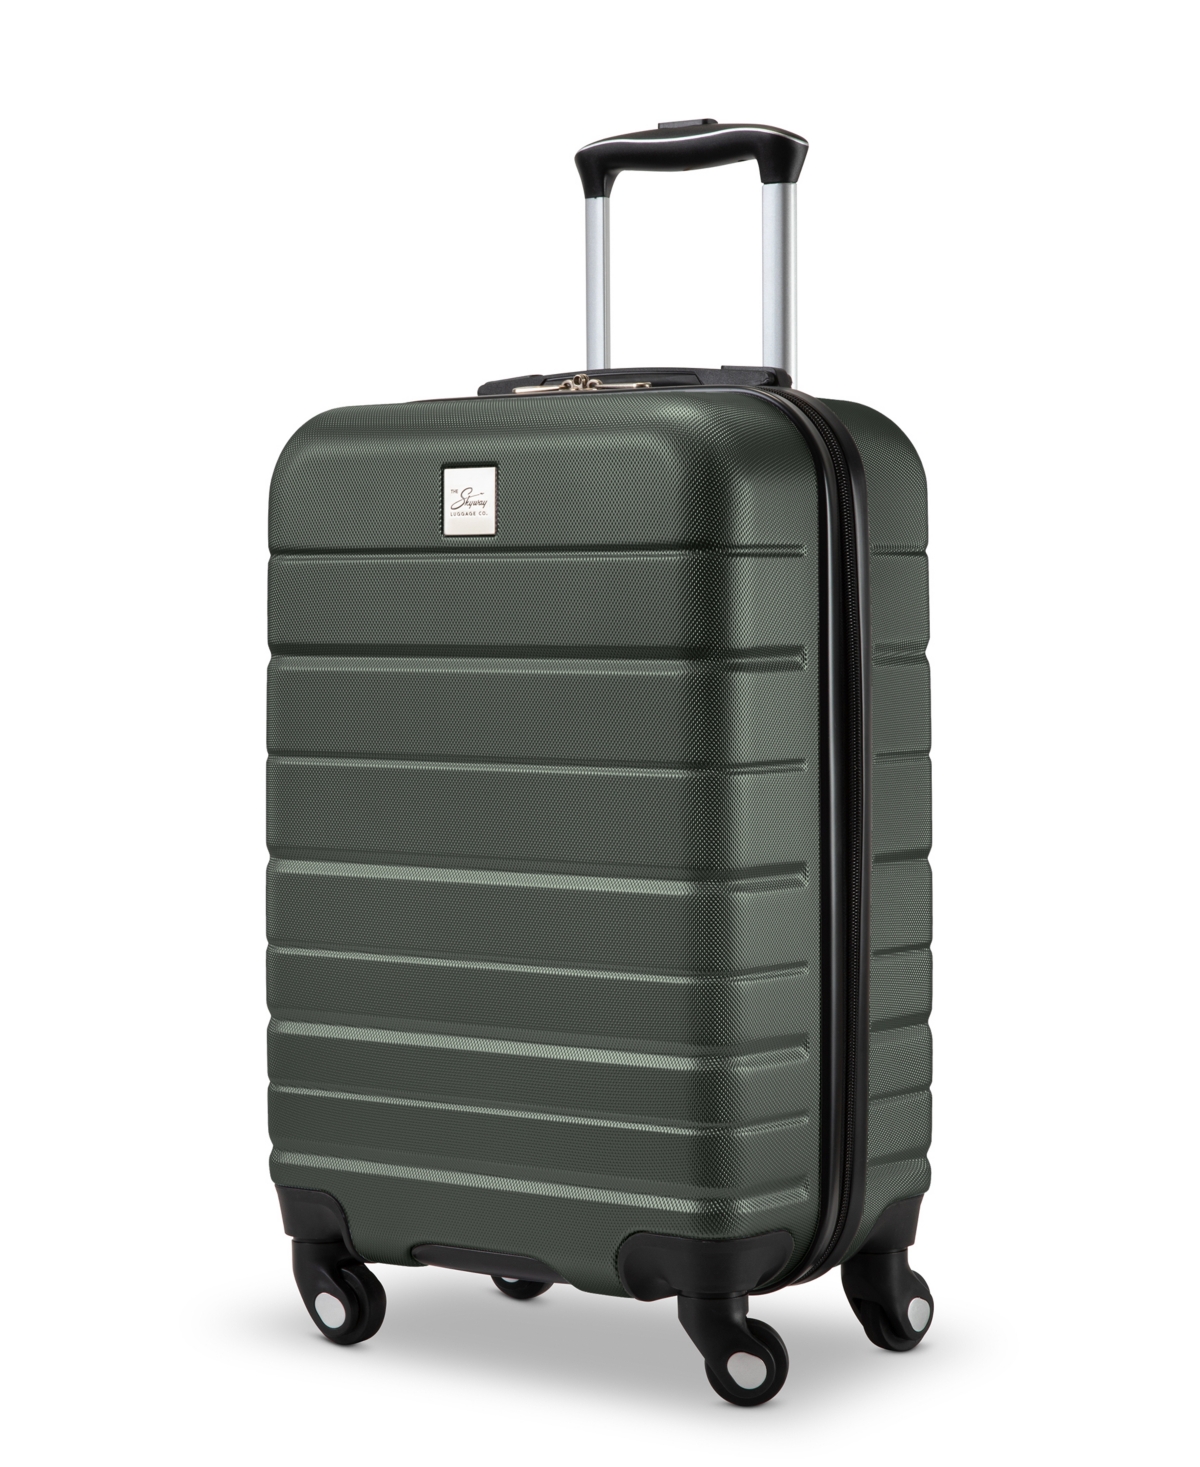 Epic 2.0 Hardside Carry-On Spinner Suitcase, 20" - Thyme